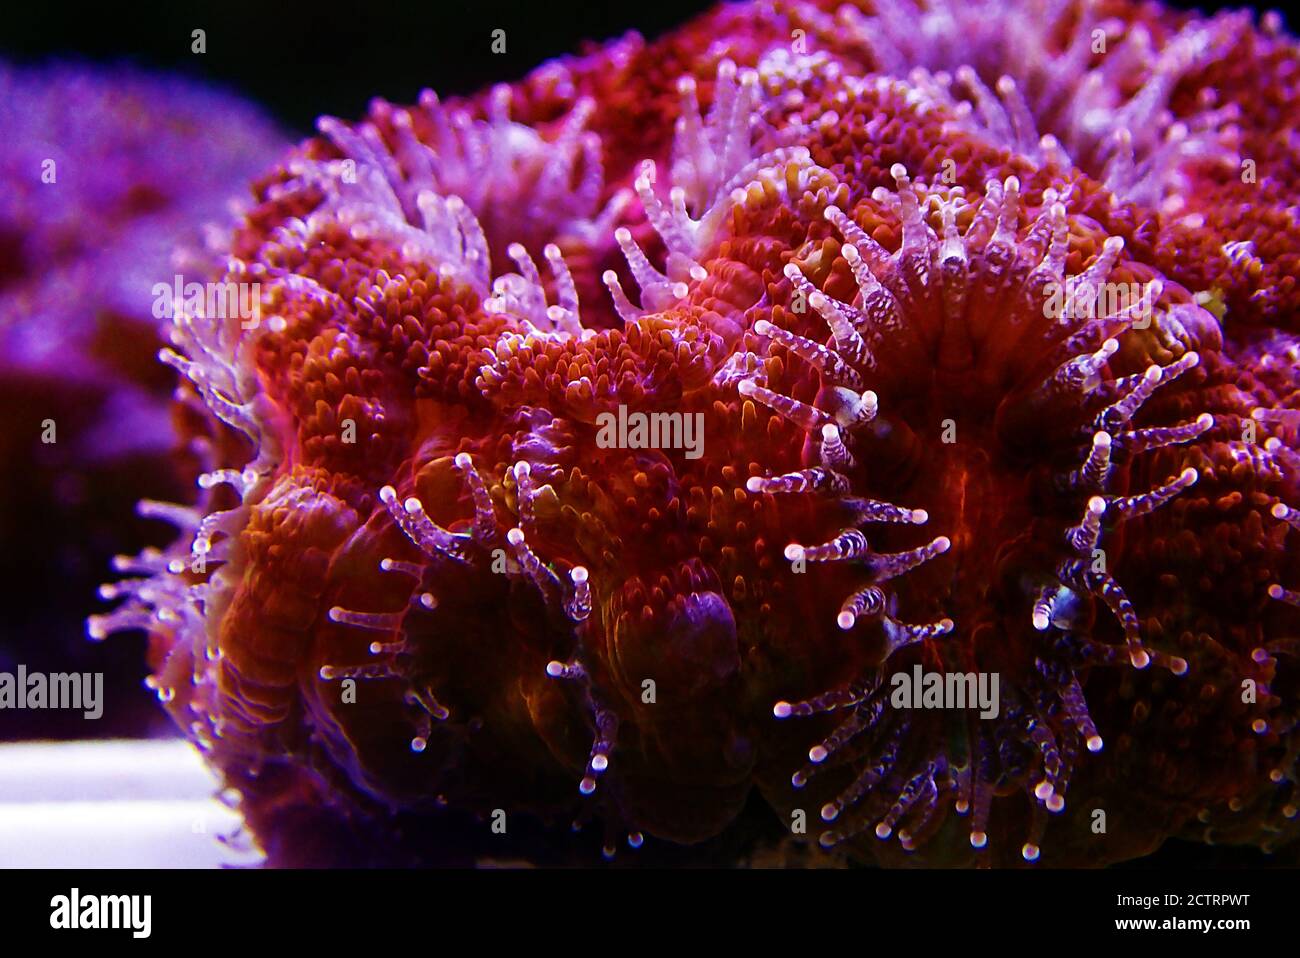 Acanthastrea Micromussa lordhowensis LPS coral in close up photography Stock Photo